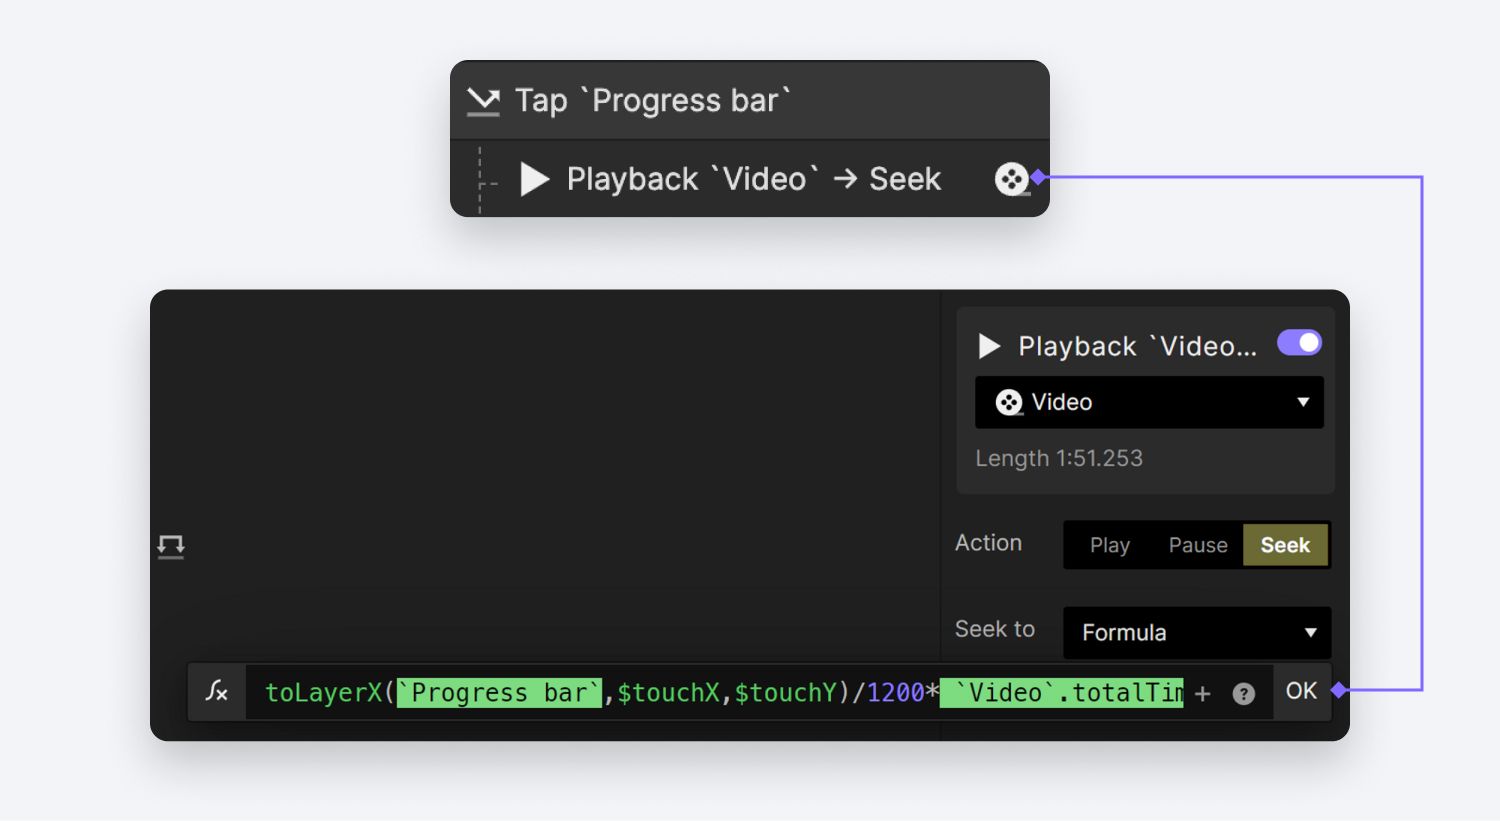 Add a Tap trigger to the Progress Bar group followed by a Playback response to the Video layer.